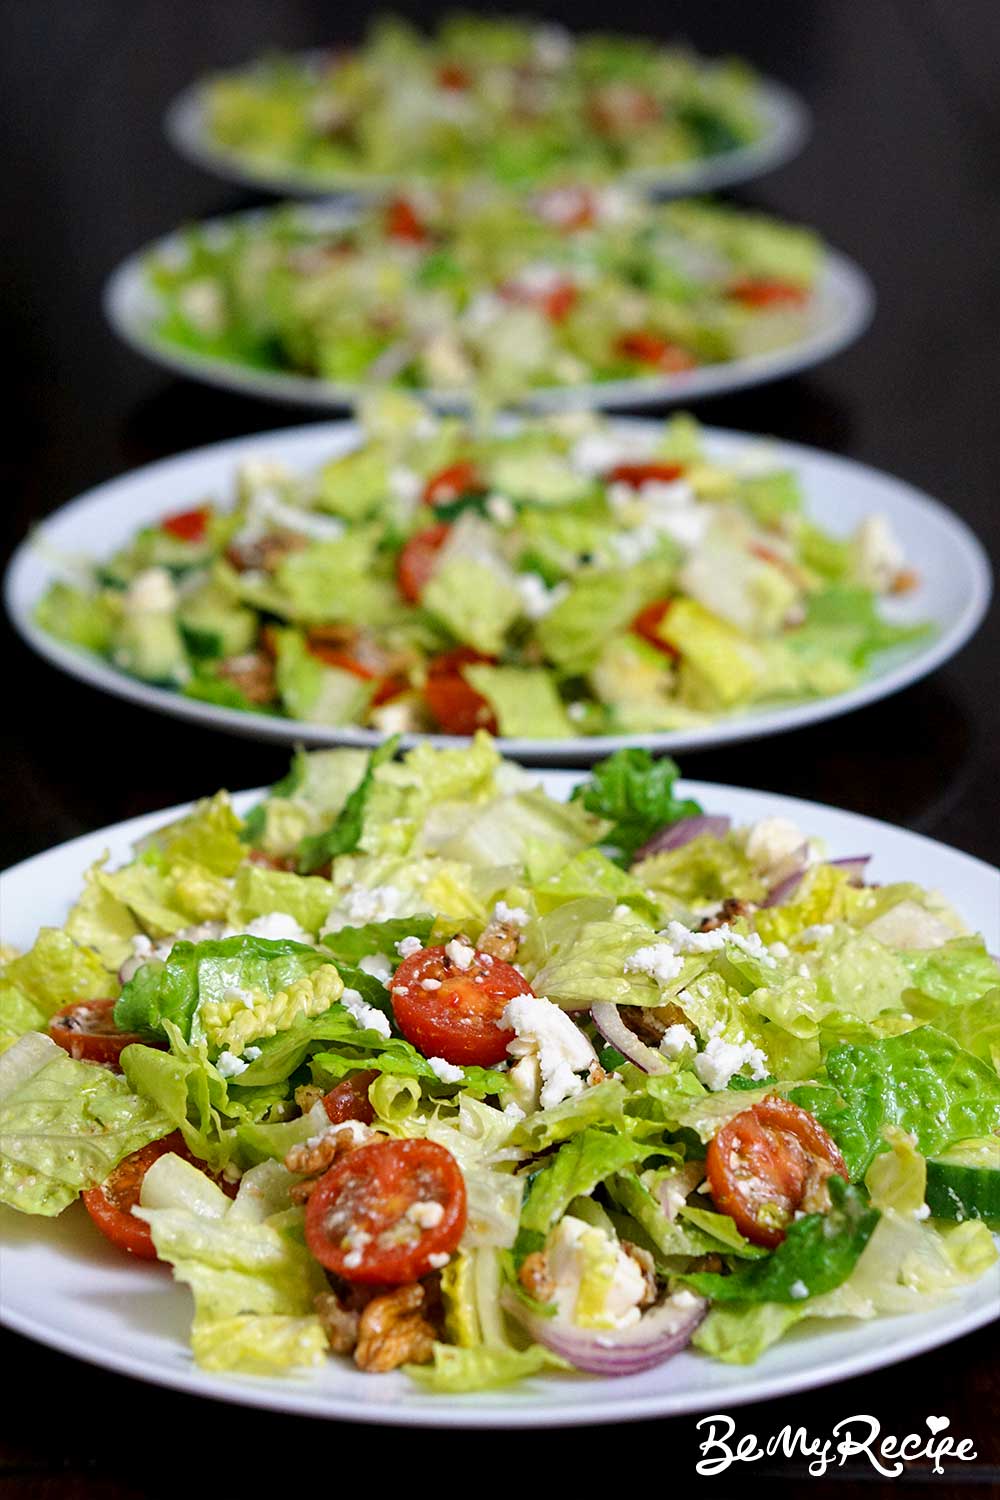 Easy Romaine Salad with Feta, Toasted Walnuts, and Tomatoes